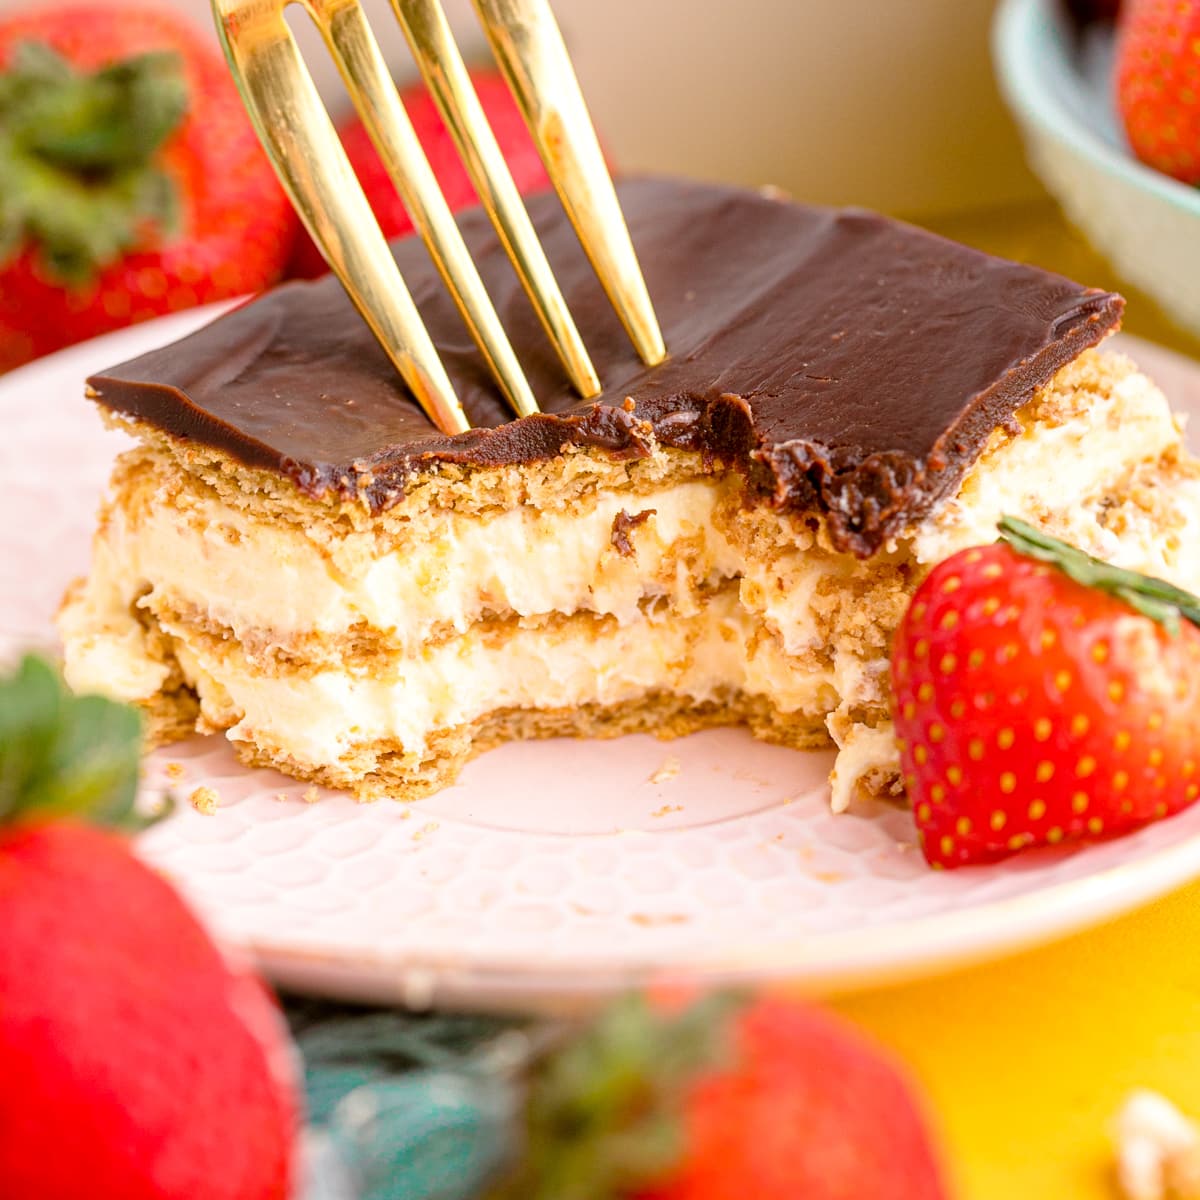 Piece of cake with layers of cream, graham crackers and chocolate topping.